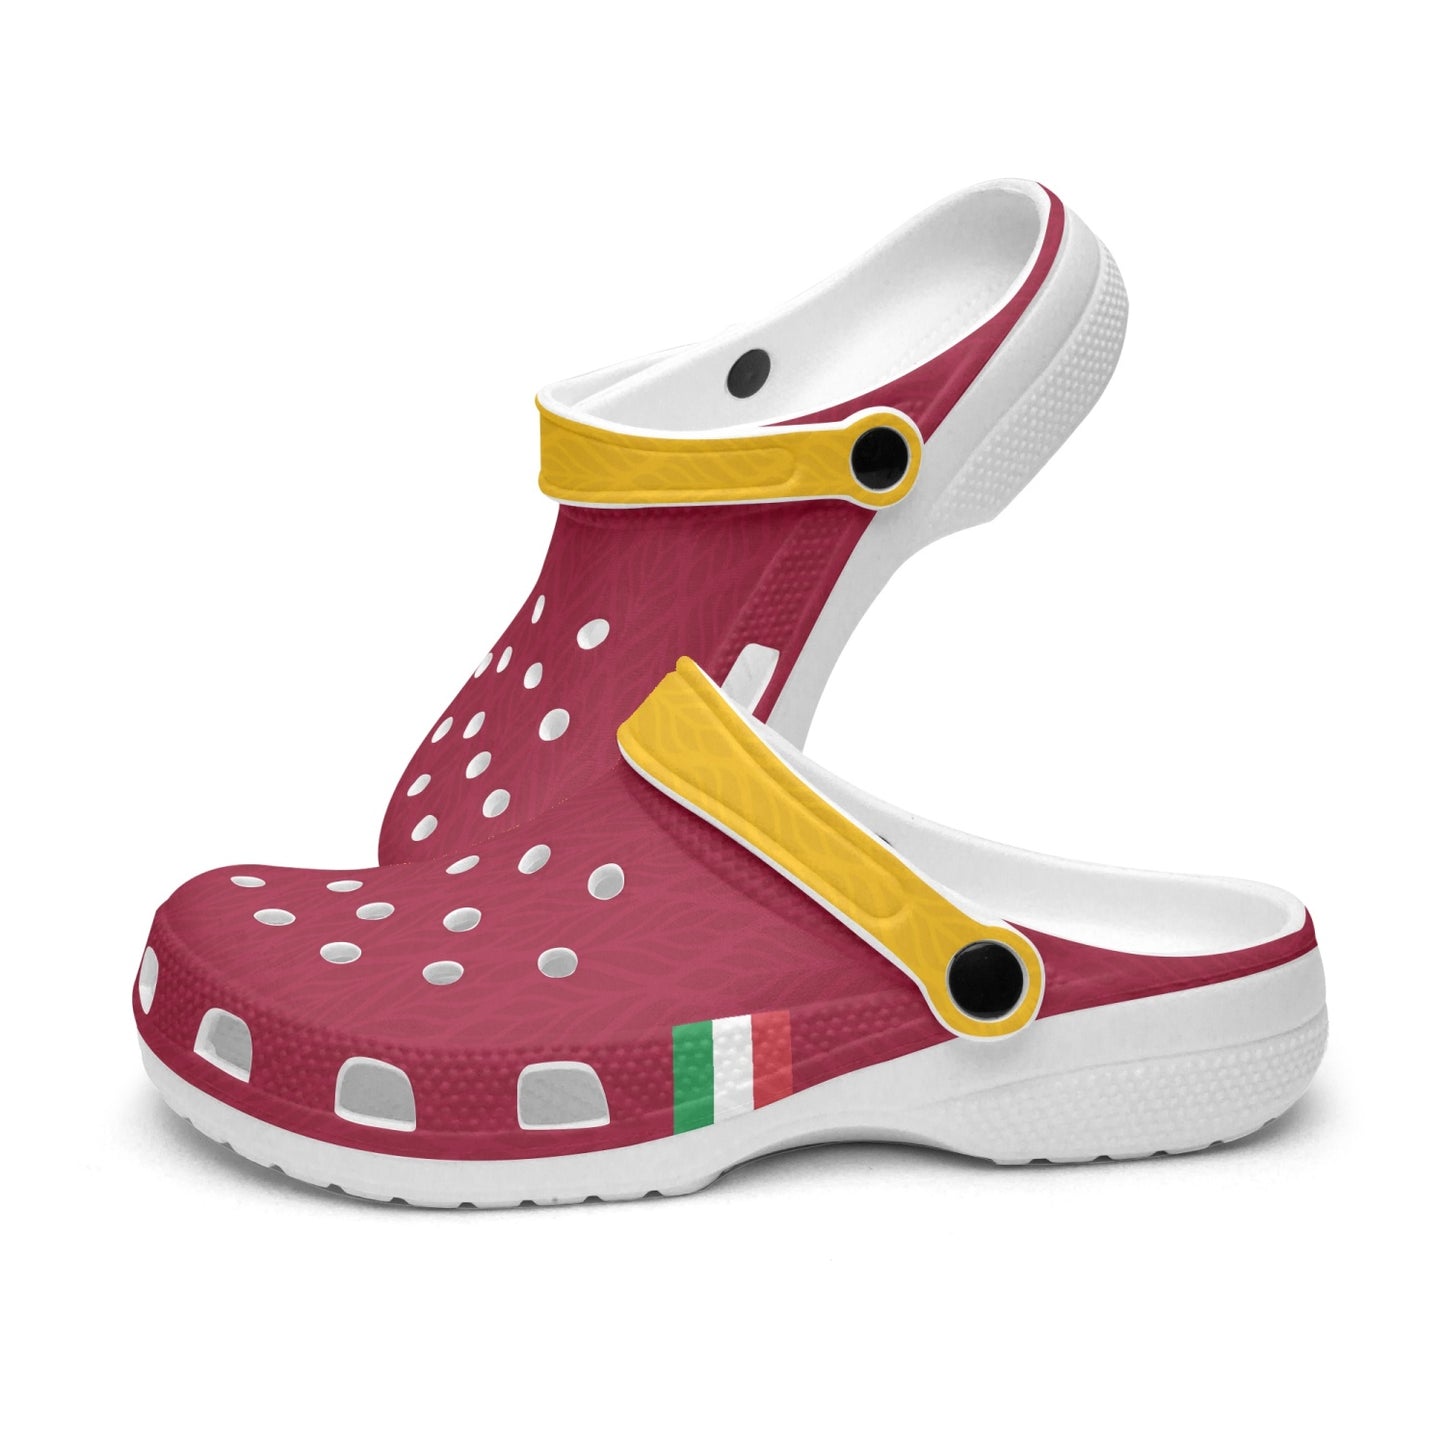 Roma Clogs shoes